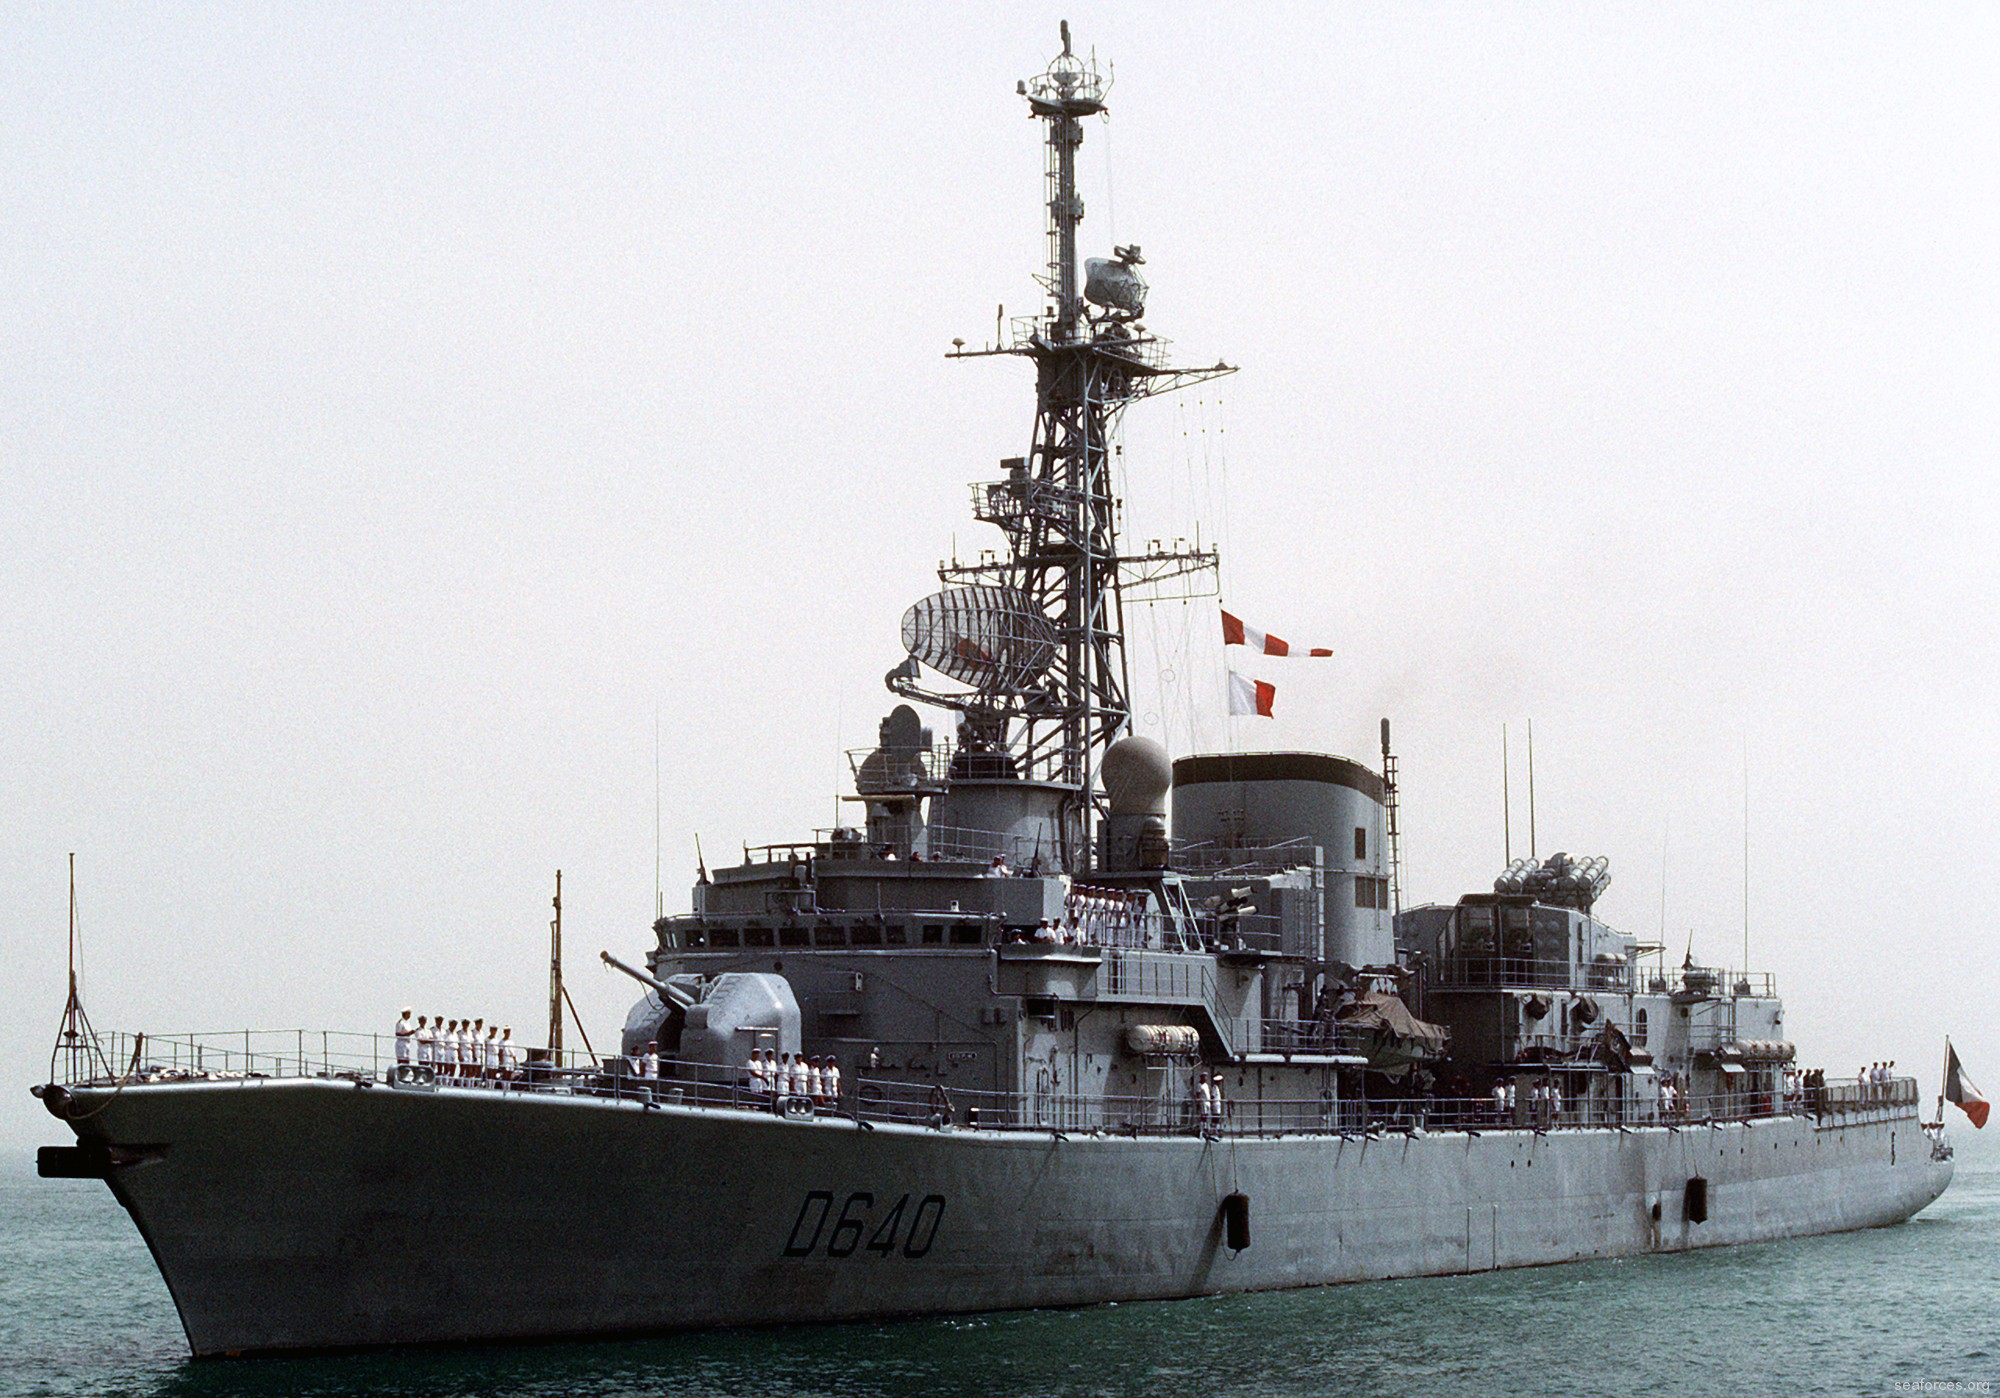 d-640 fs georges leygues f70as class anti submarine frigate asw french navy marine nationale 04